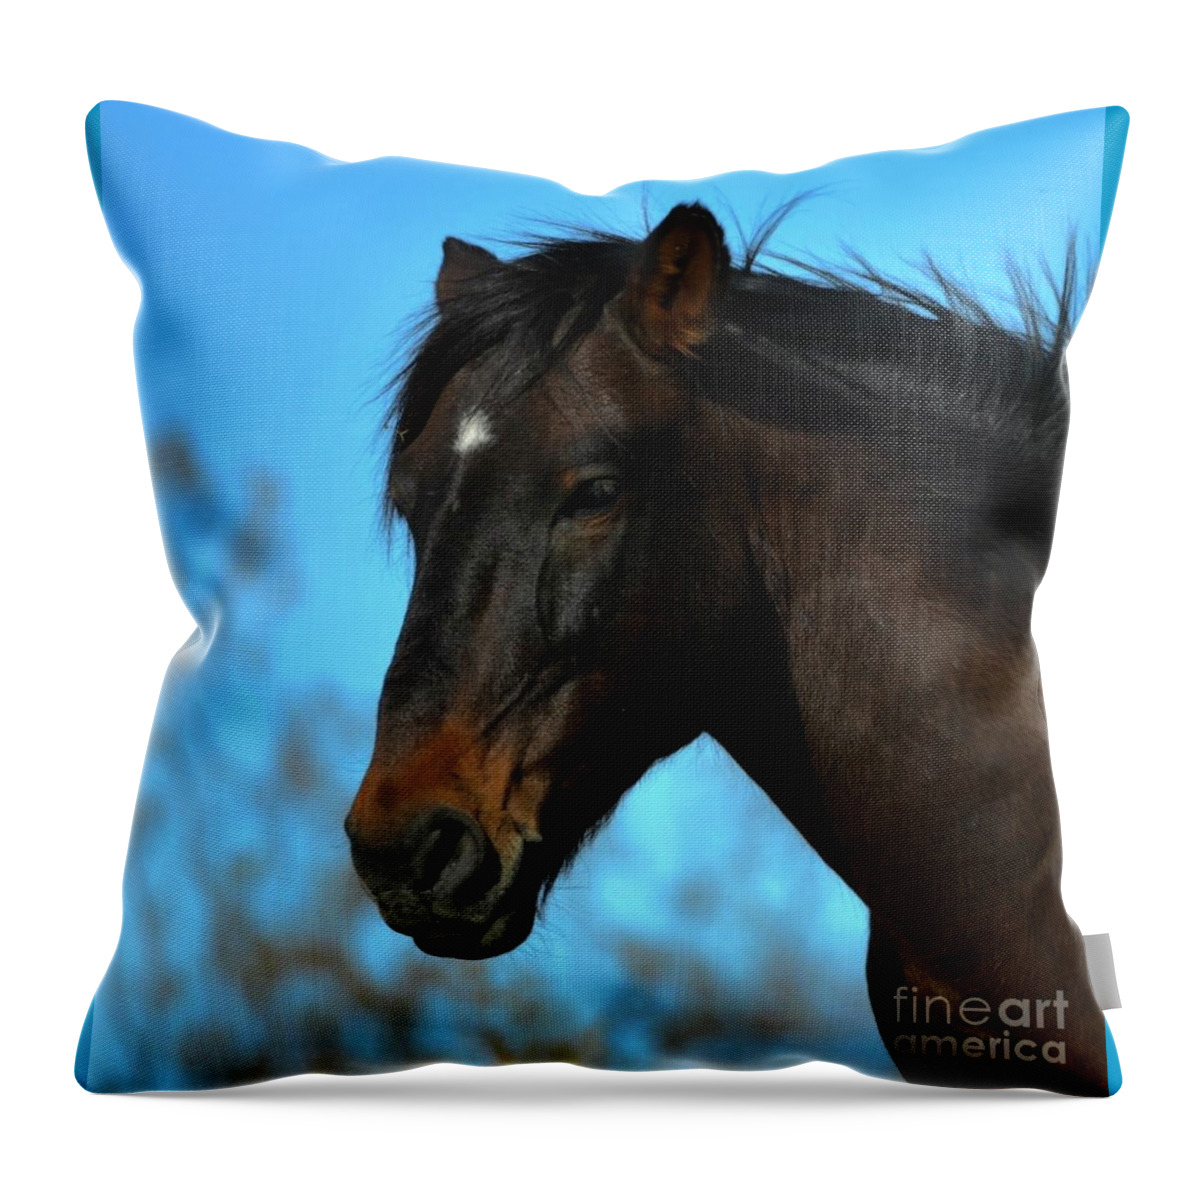 Salt River Wild Horse Throw Pillow featuring the digital art Loyal by Tammy Keyes